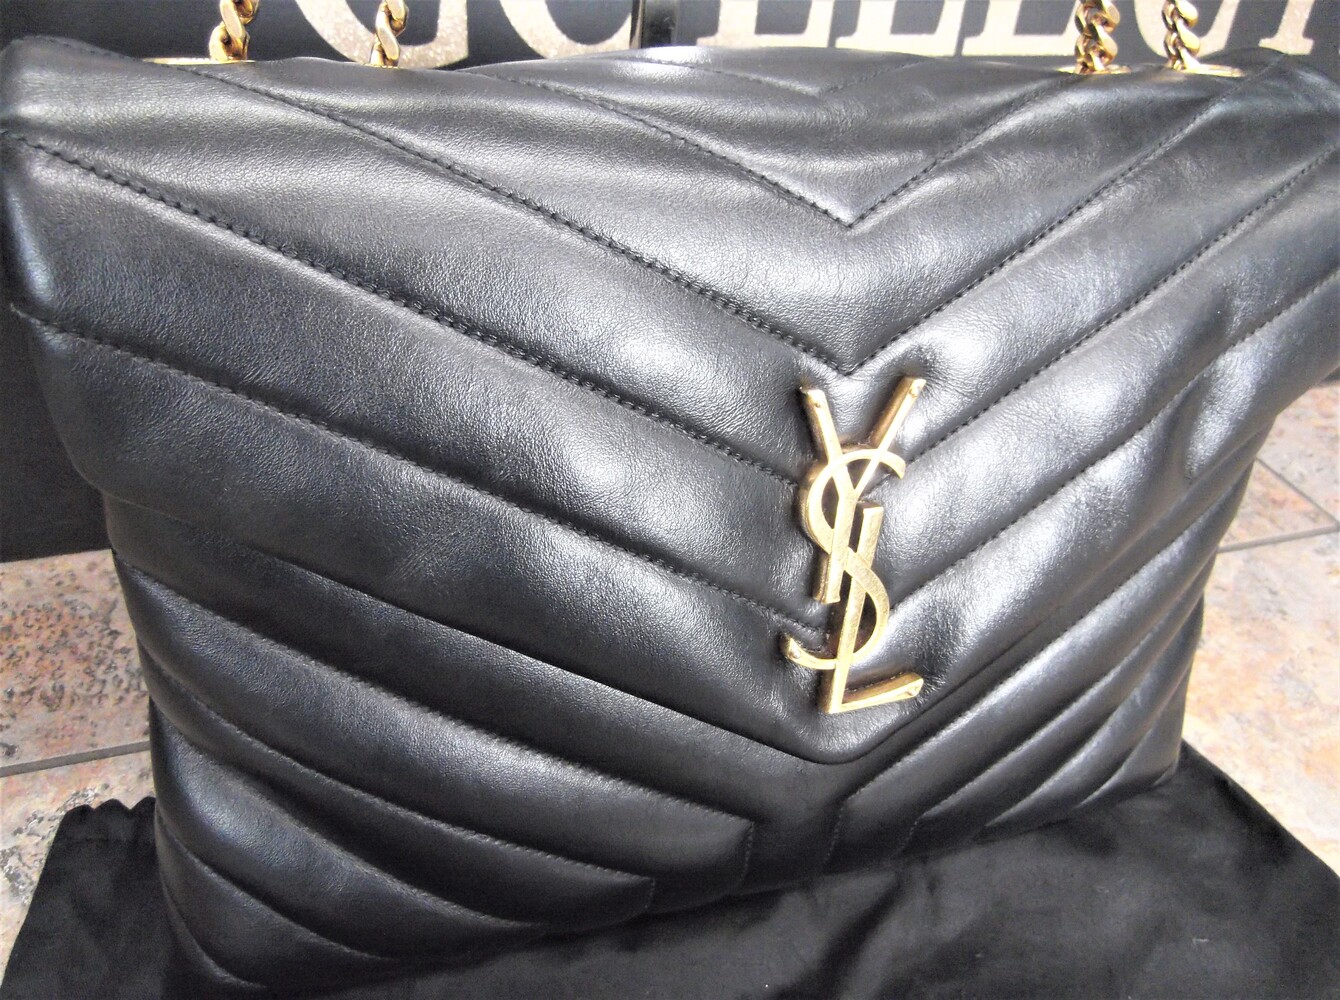 YSL LOULOU MEDIUM CHAIN BAG IN QUILTED 